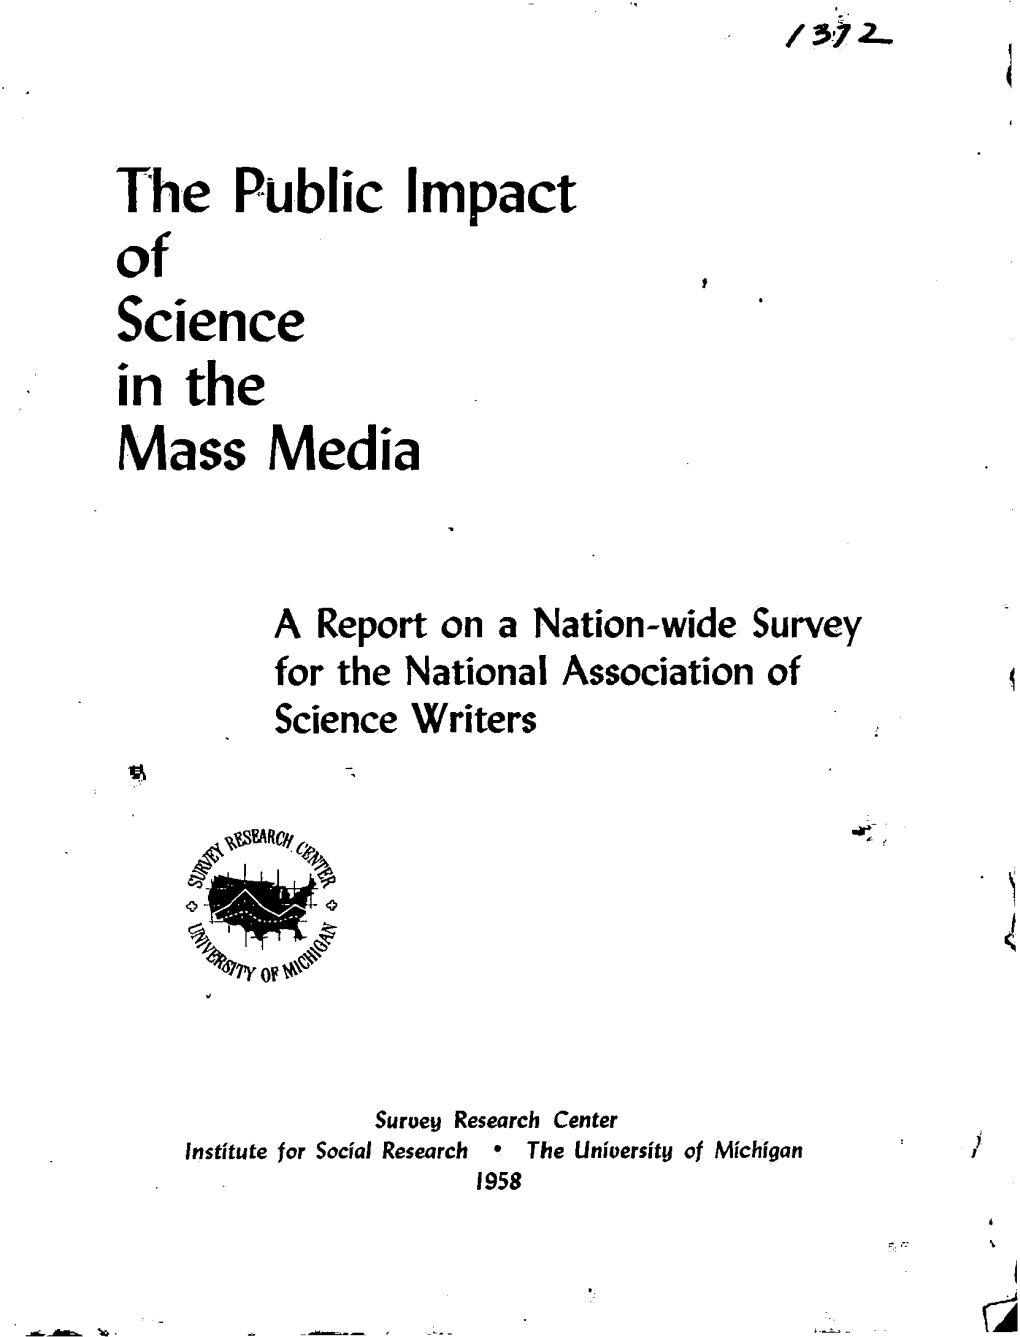 The Public Impact of Science in the Mass Media